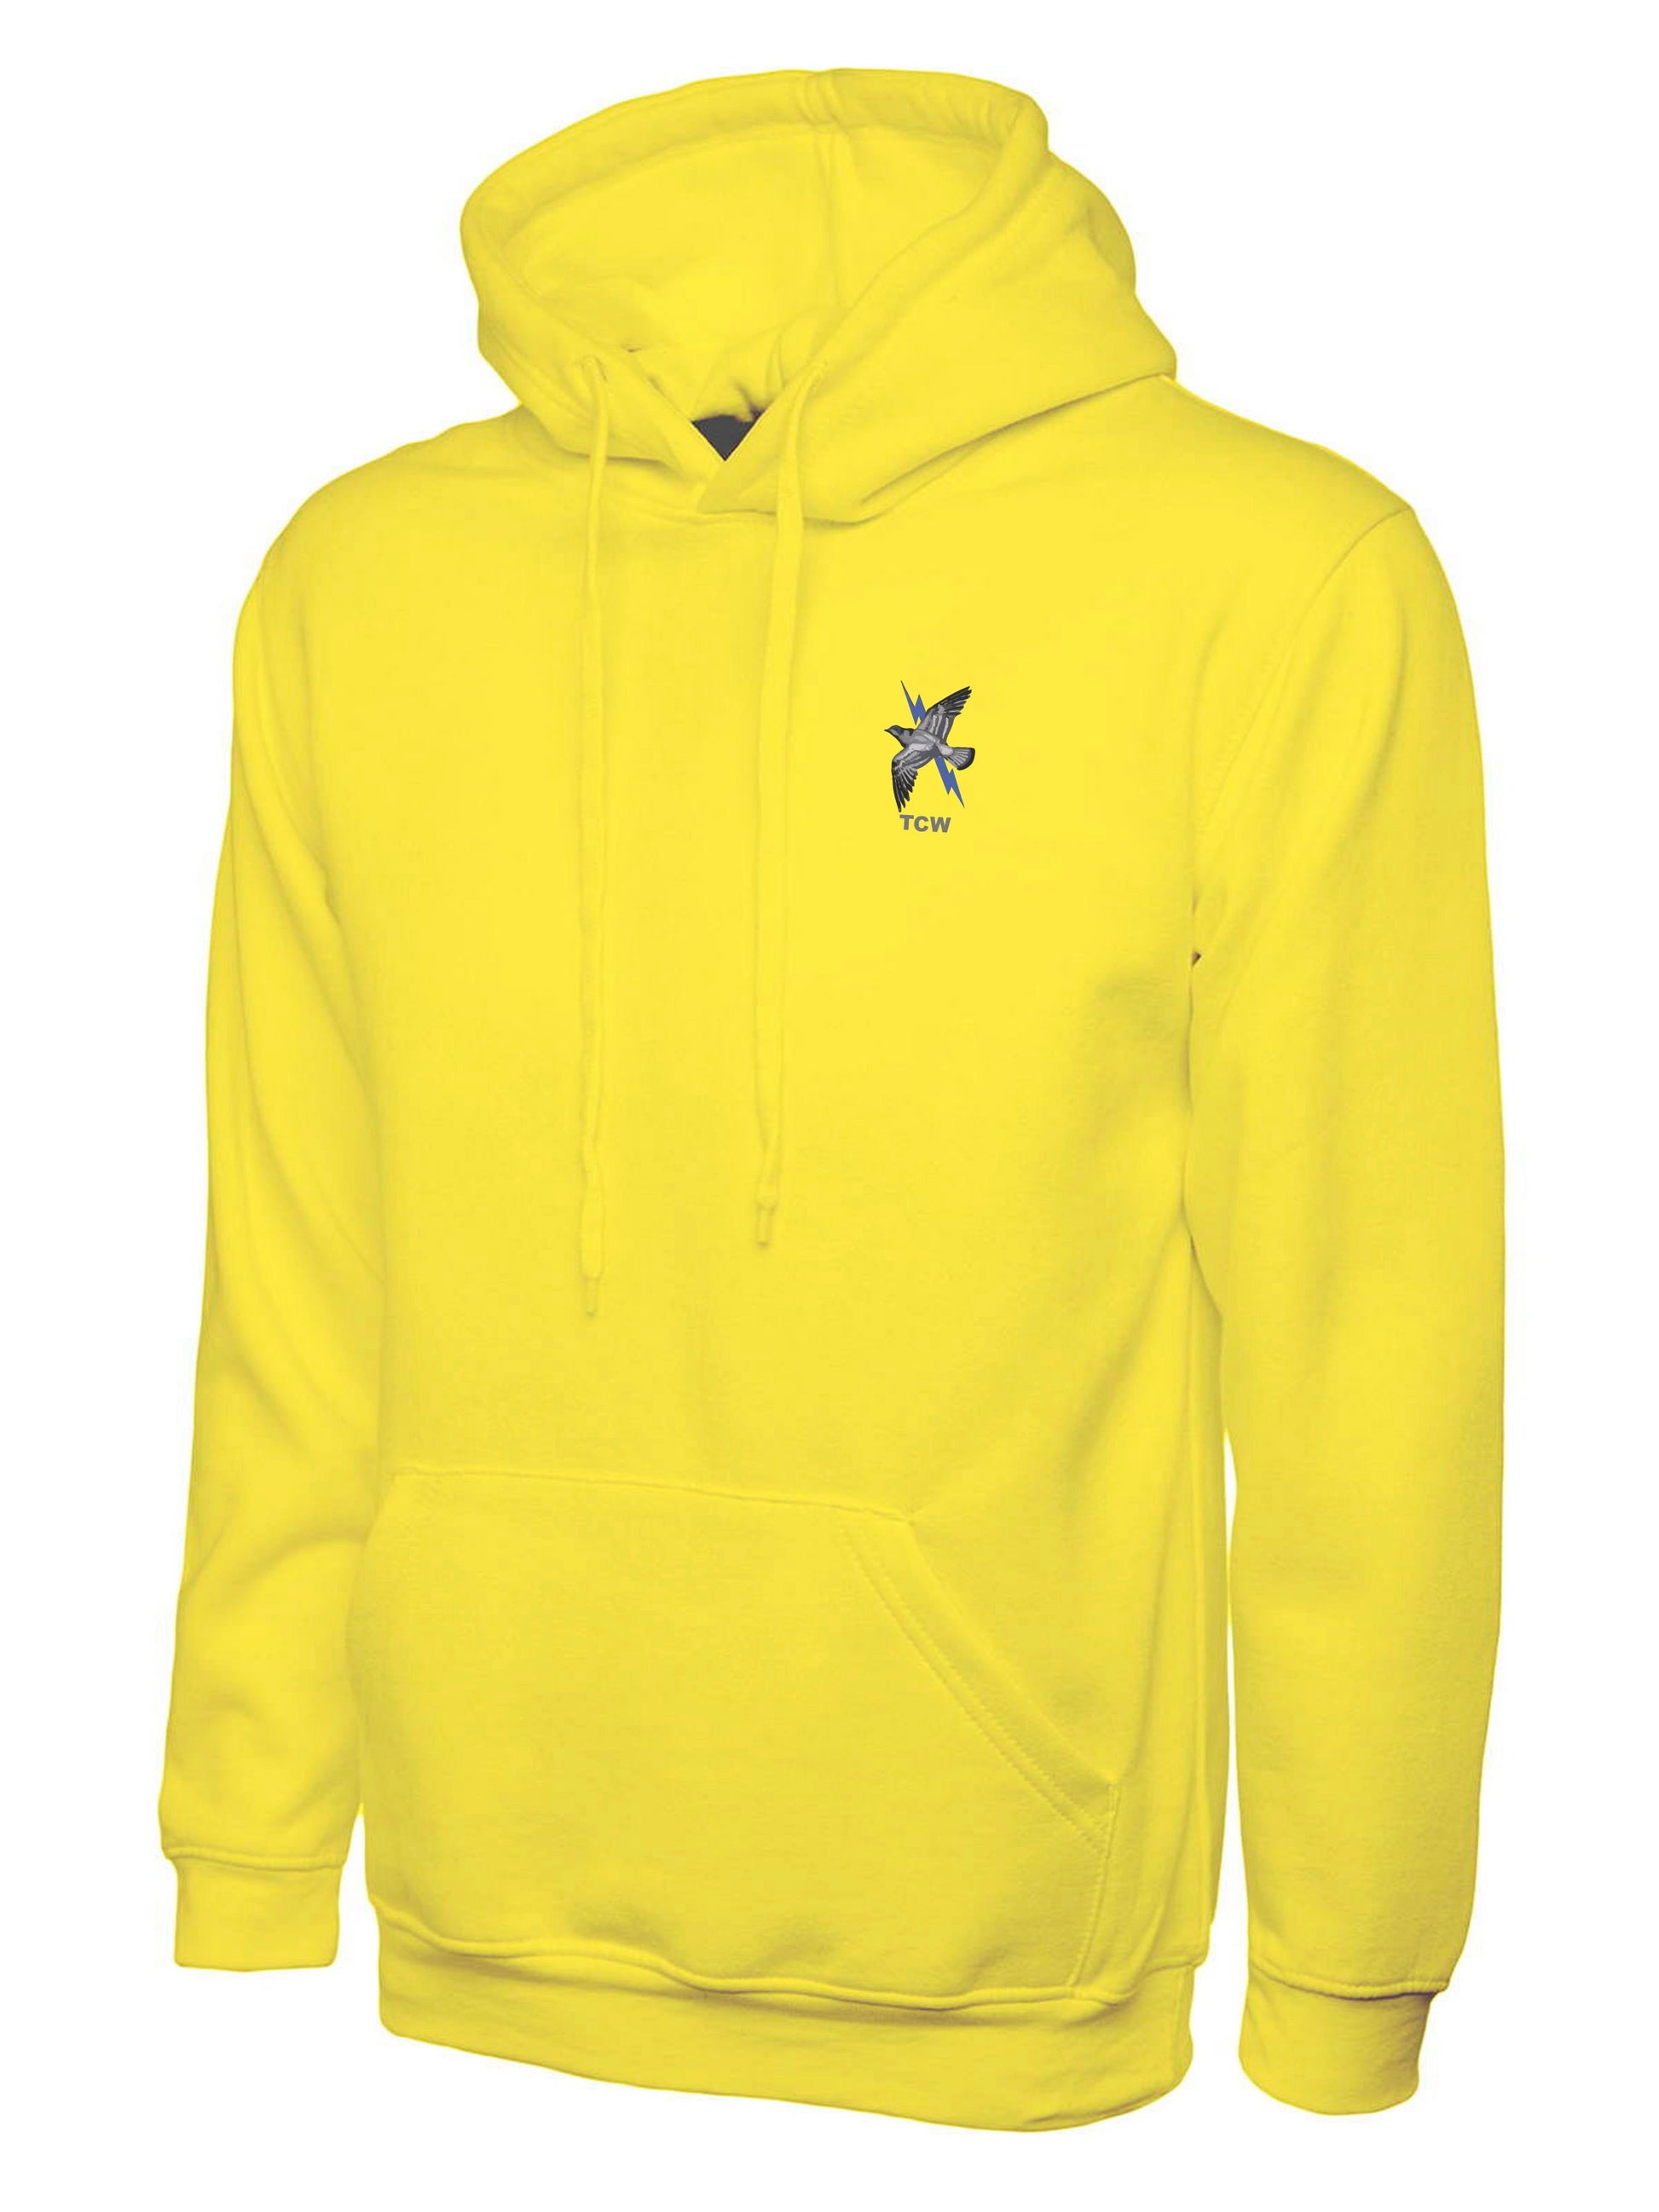 TCW ROCK DOVE EMBROIDERED HOODIE - The Forces Shop